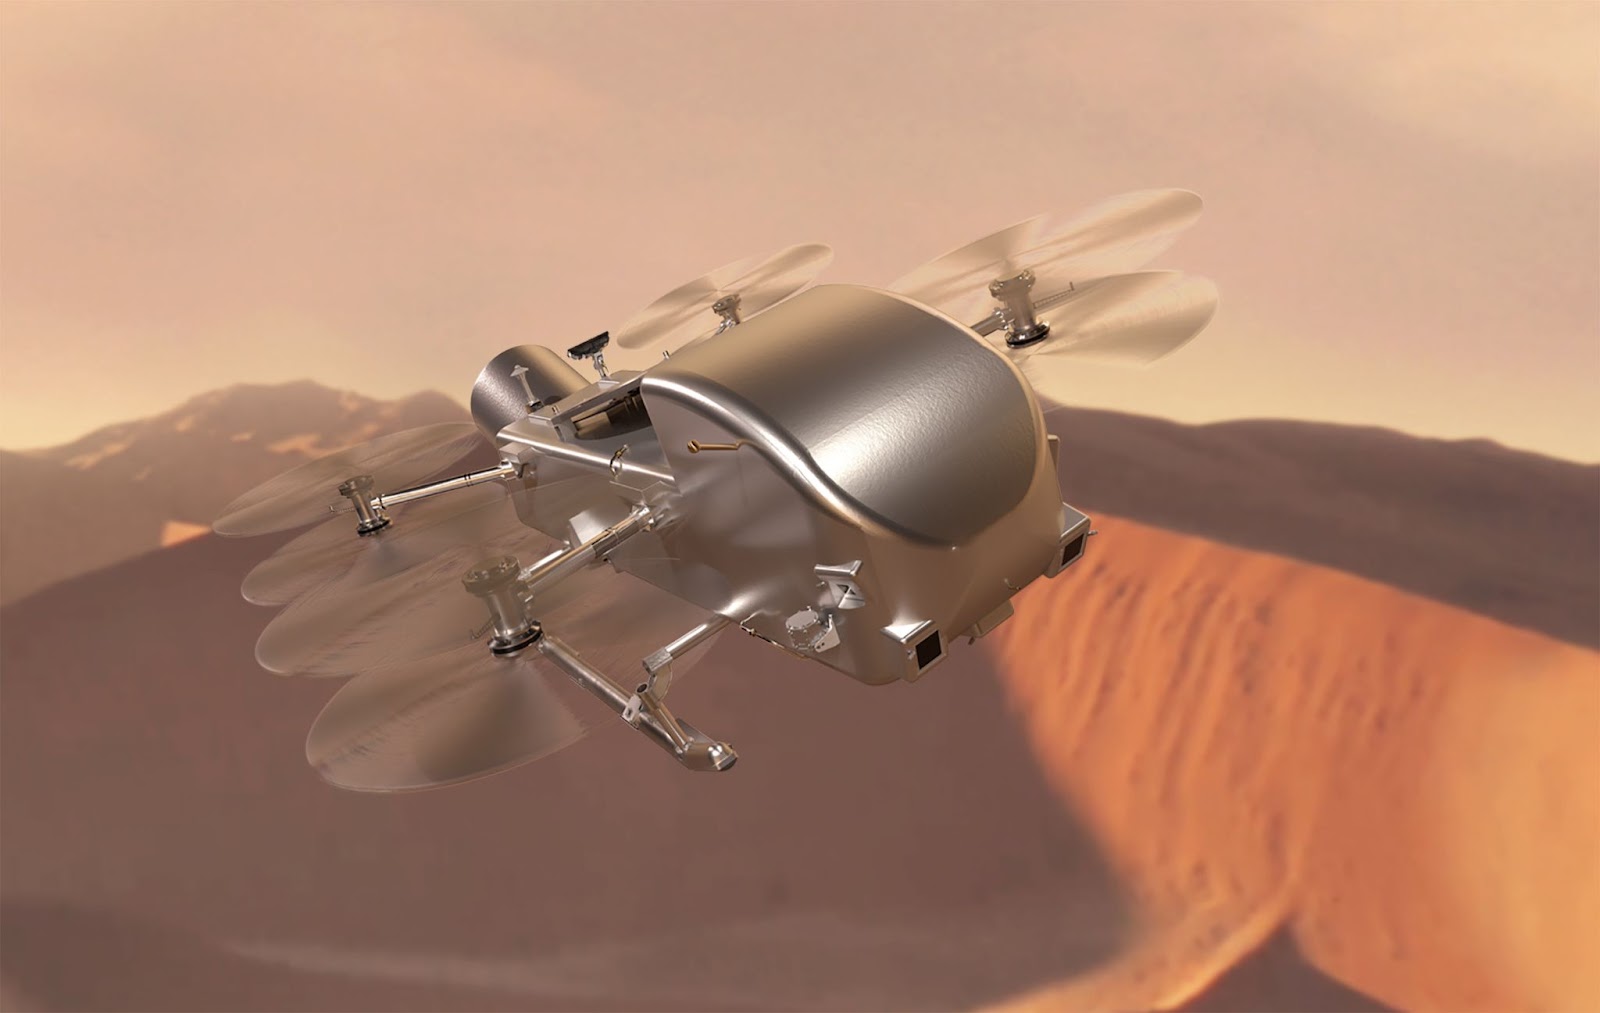 A futuristic drone with multiple propellers flying over a red landscape.